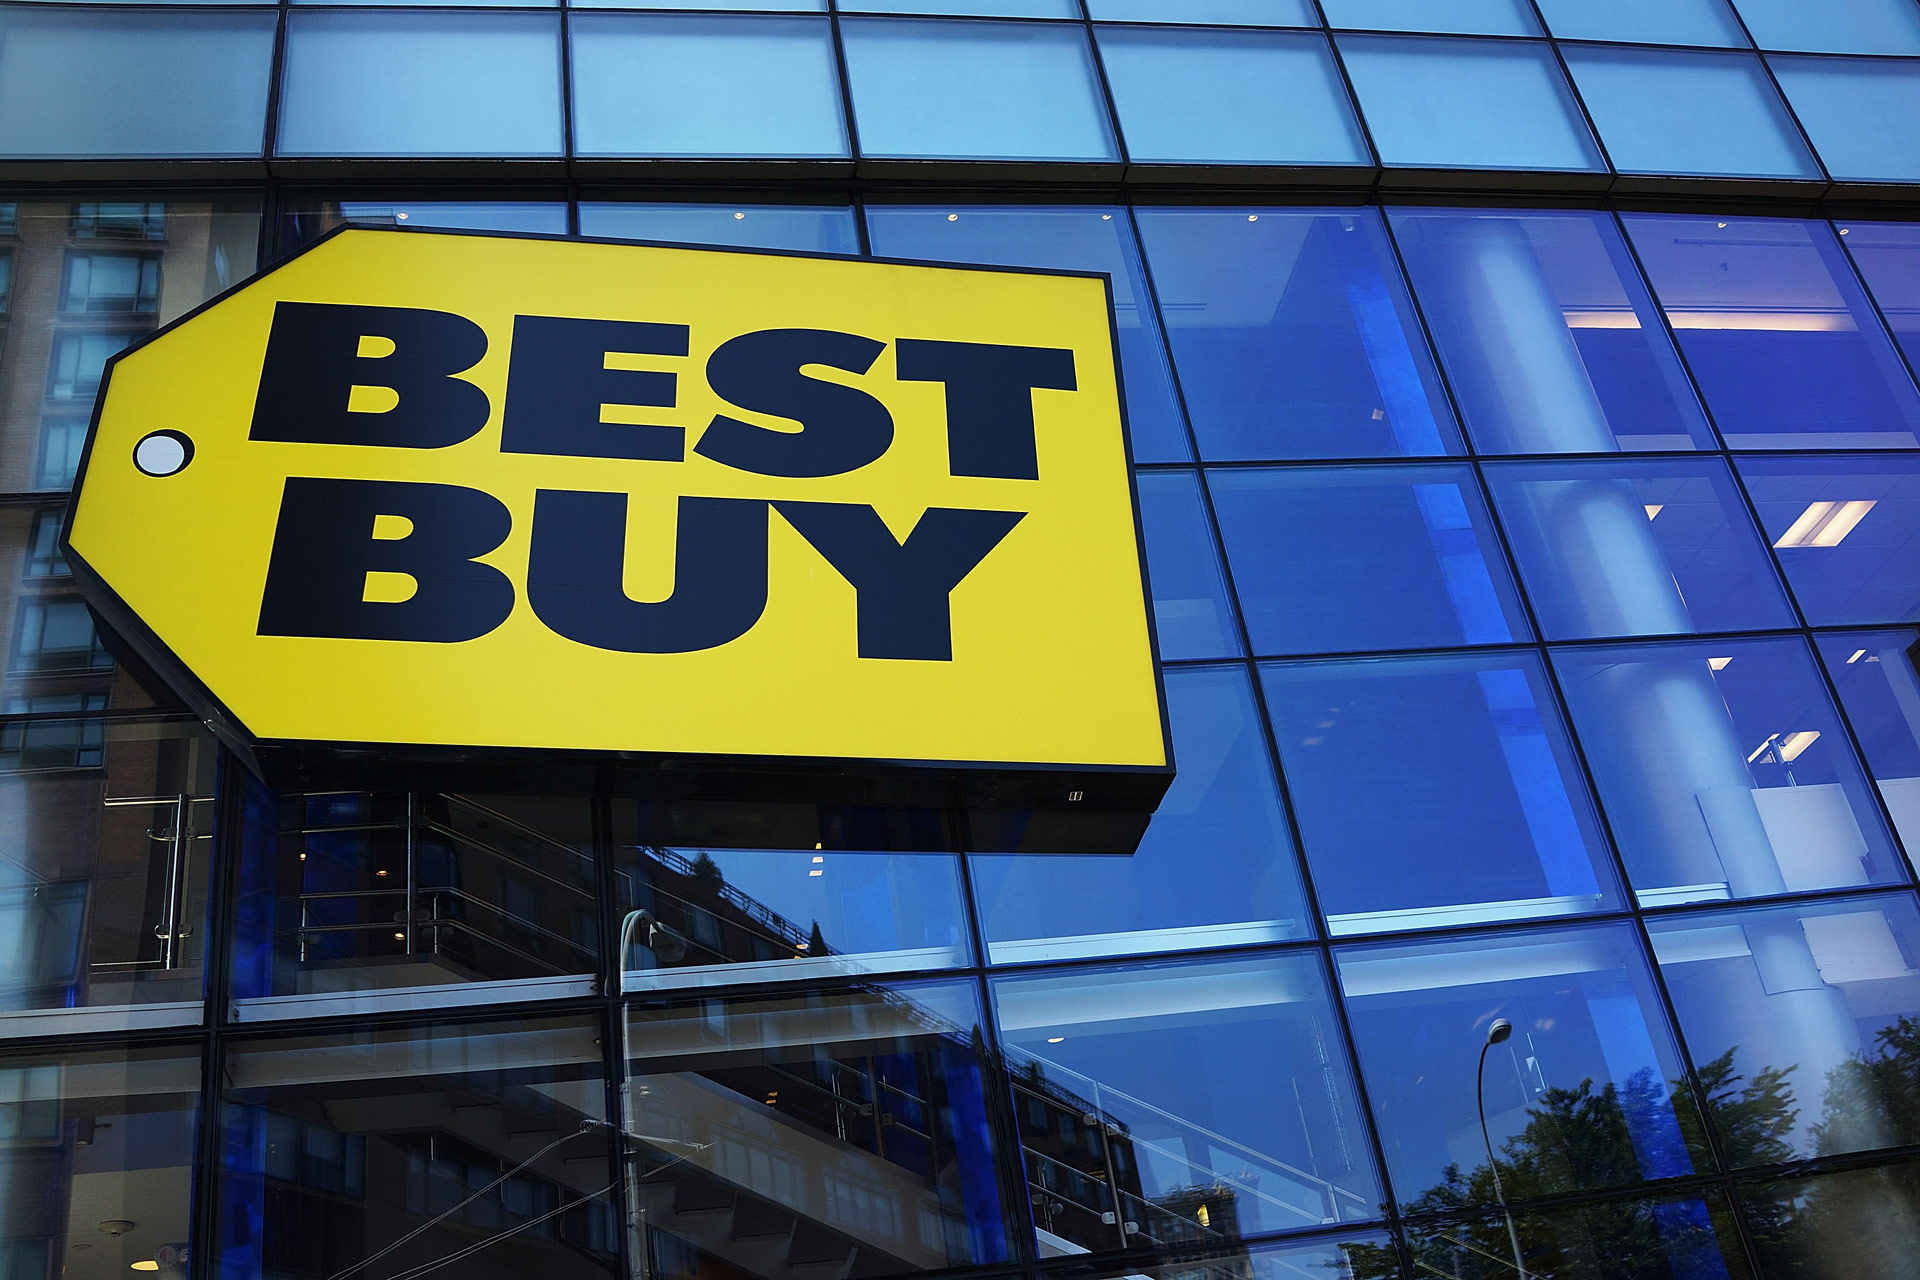 A photo of the Best Buy logo on a store